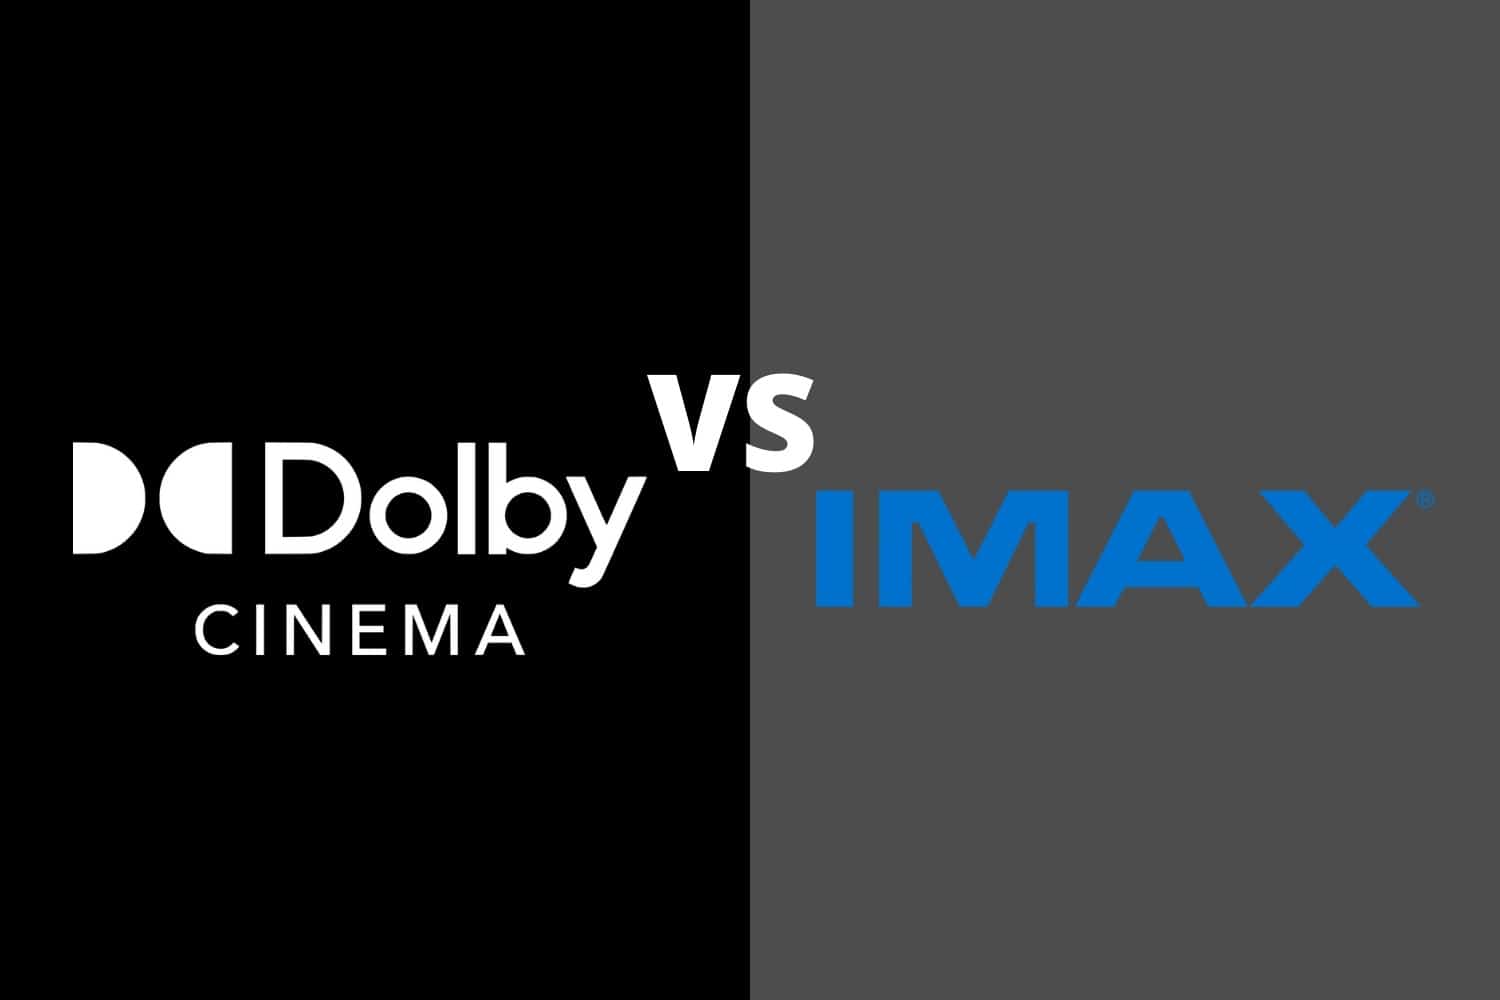 Dolby Cinema vs IMAX: Which cinema technology is better? - Spacehop